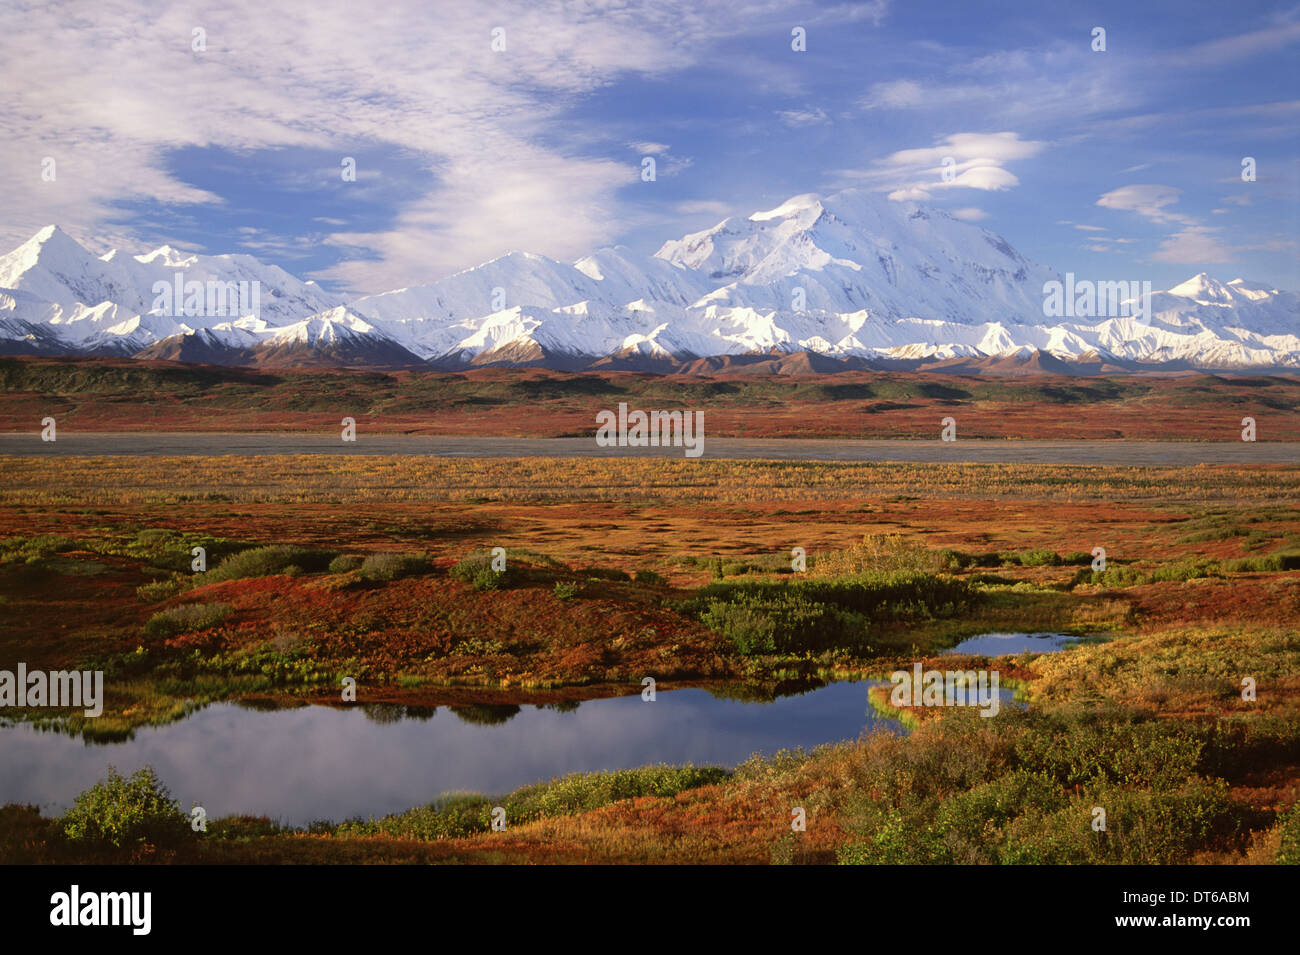 Tundra and kettle pond in Denali National Park, Alaska in the fall. Mount McKinley in the background. Stock Photo